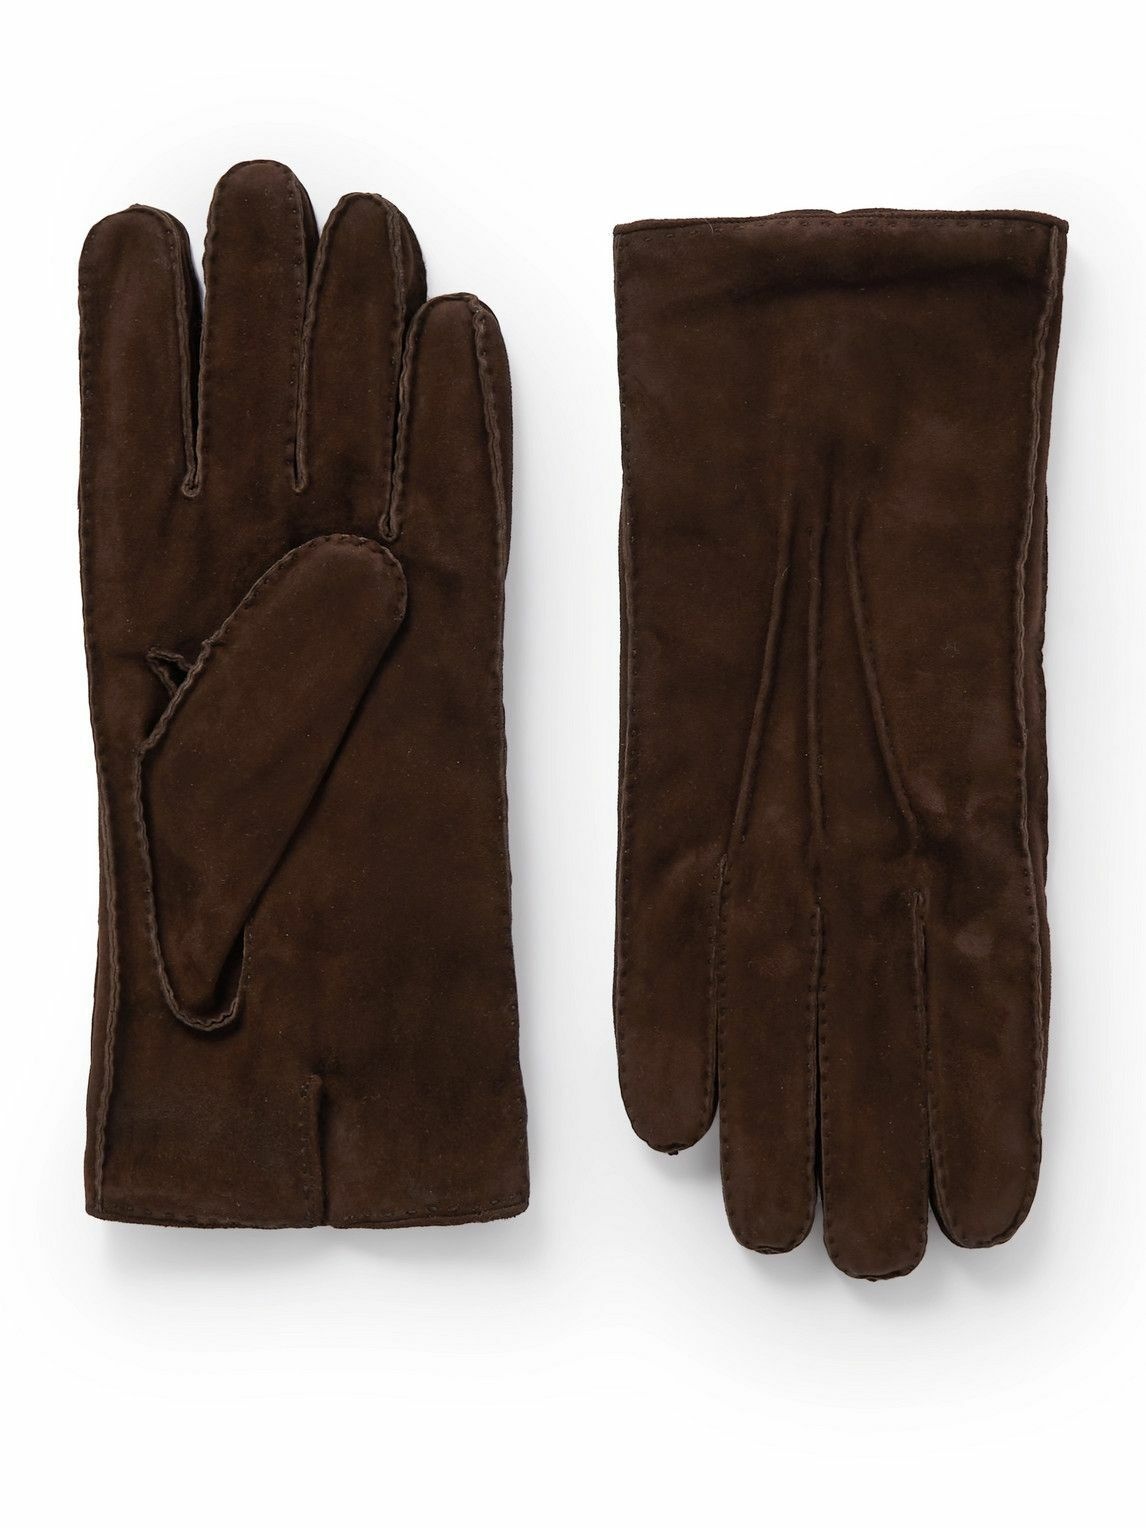 Thom Sweeney - Cashmere-Lined Suede Gloves Thom Sweeney